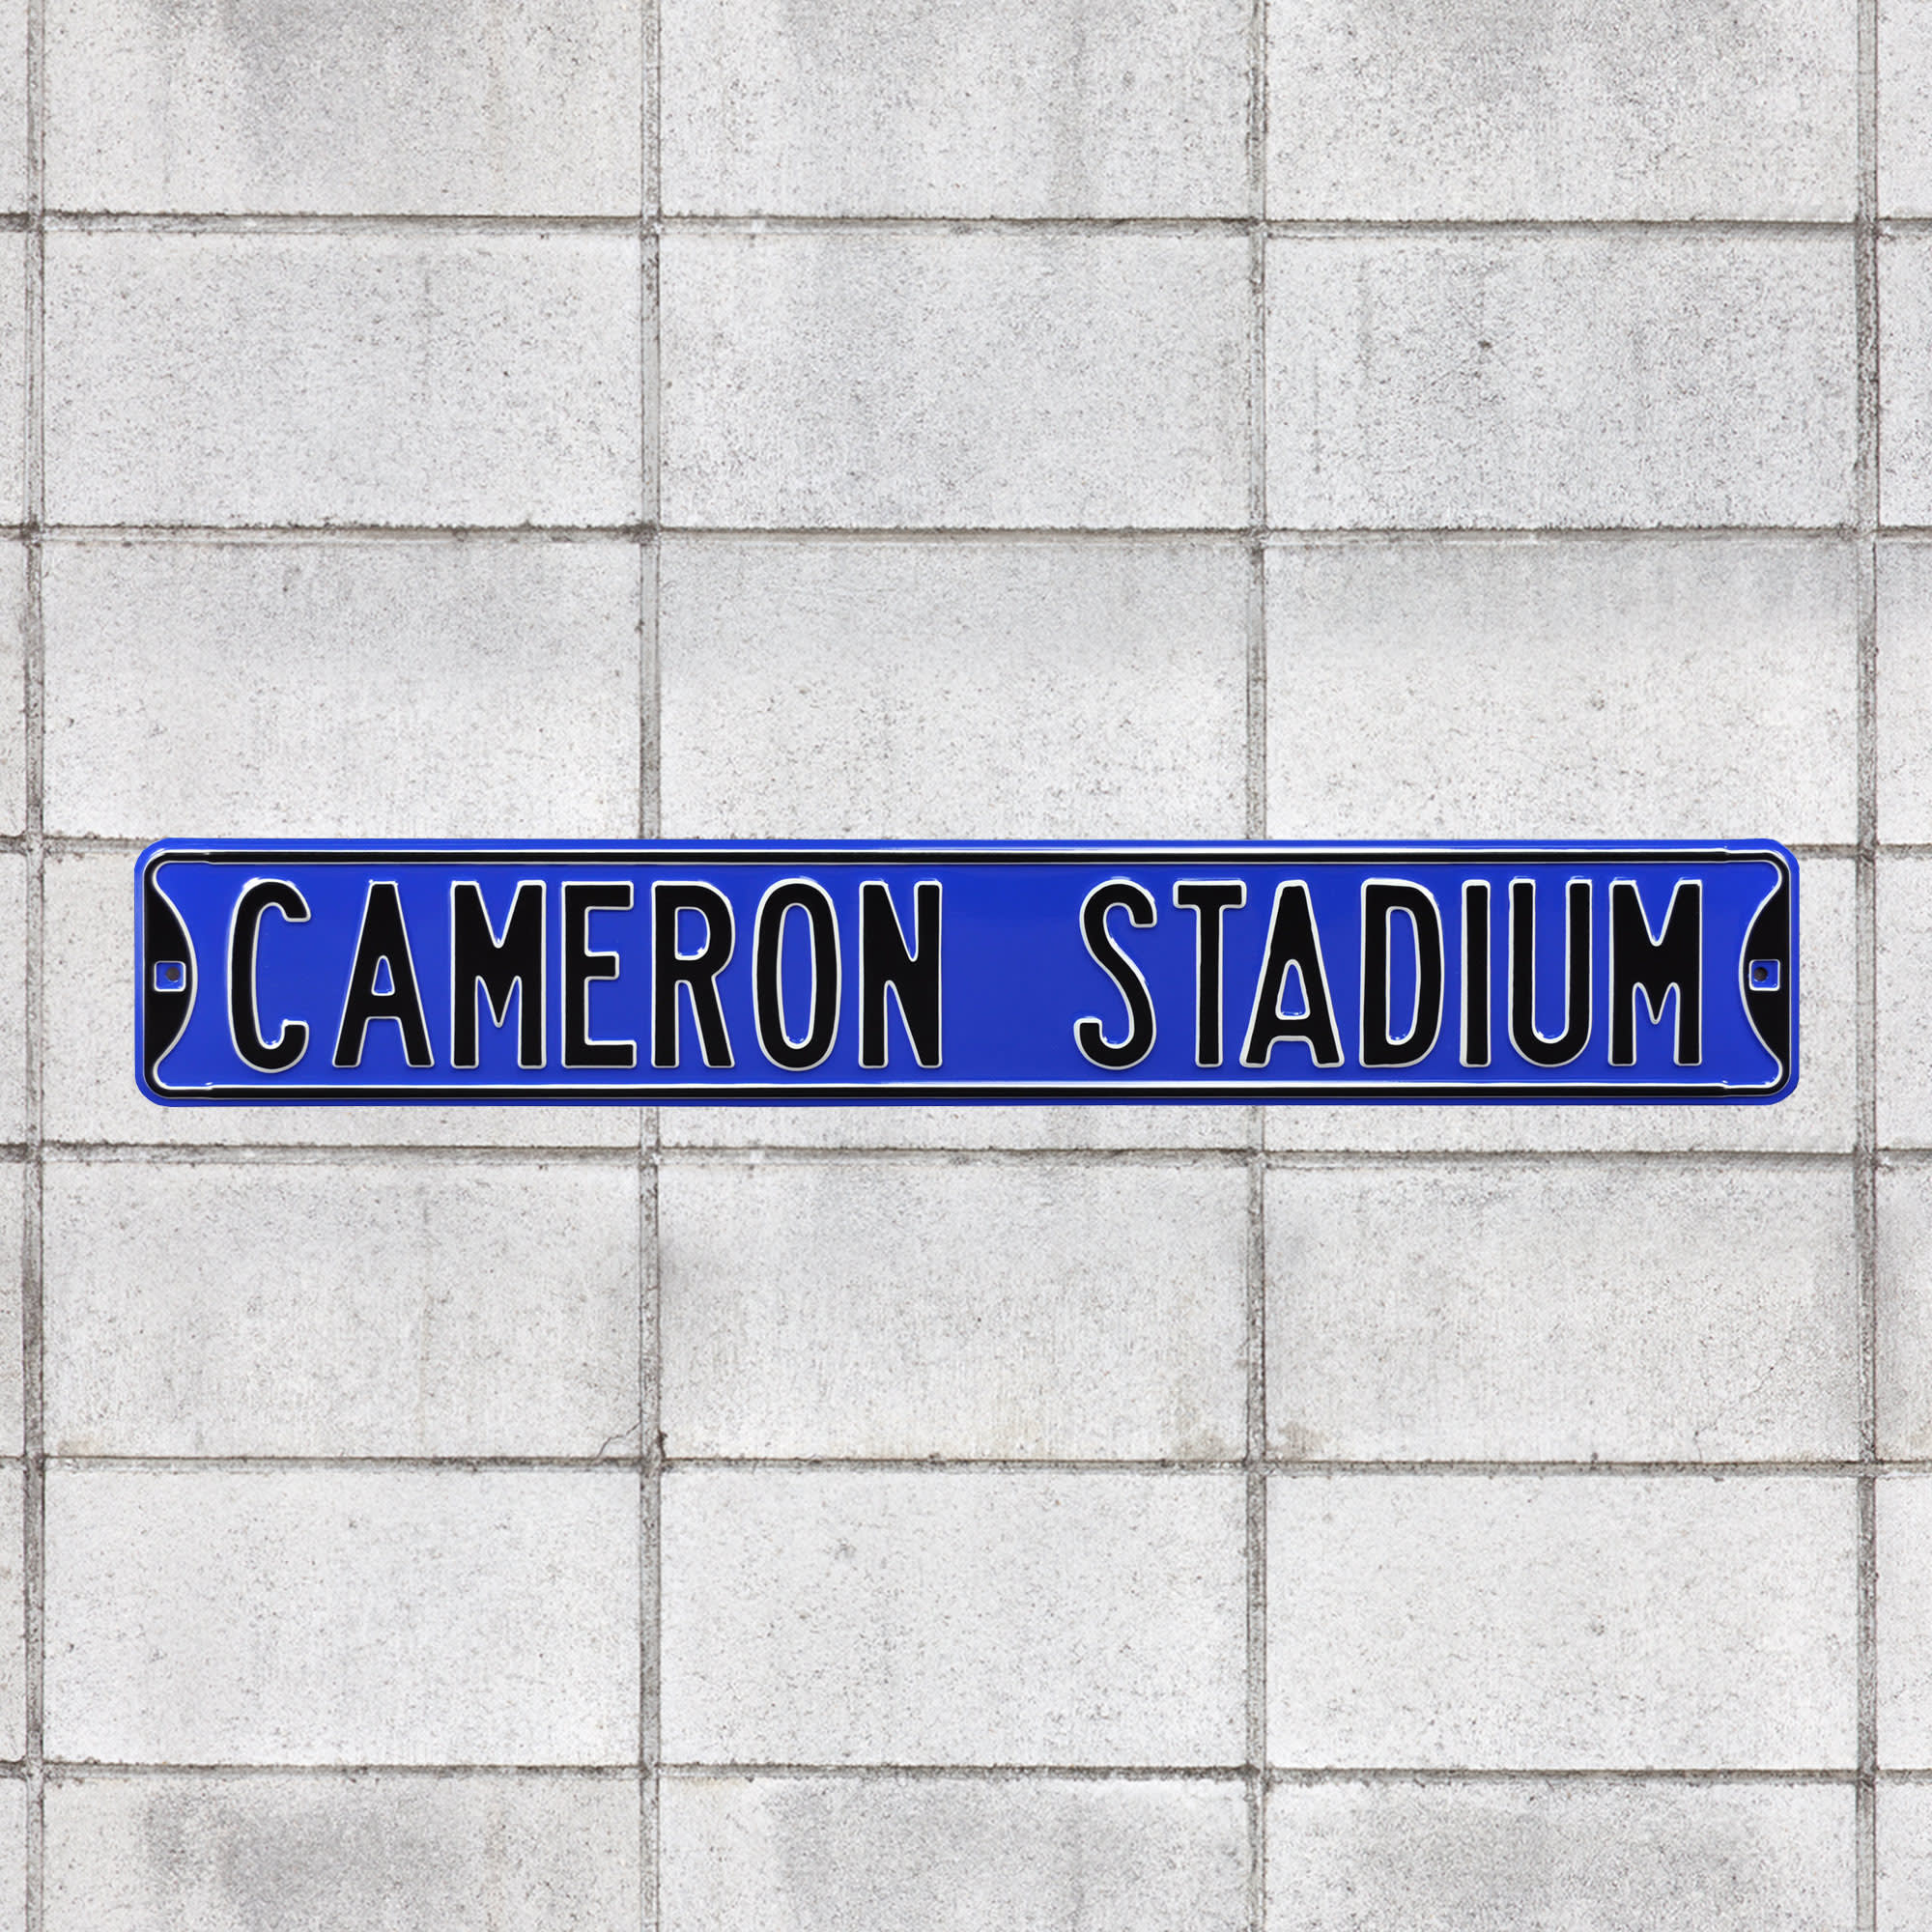 Duke Blue Devils: Cameron Stadium - Officially Licensed Metal Street Sign 36.0"W x 6.0"H by Fathead | 100% Steel